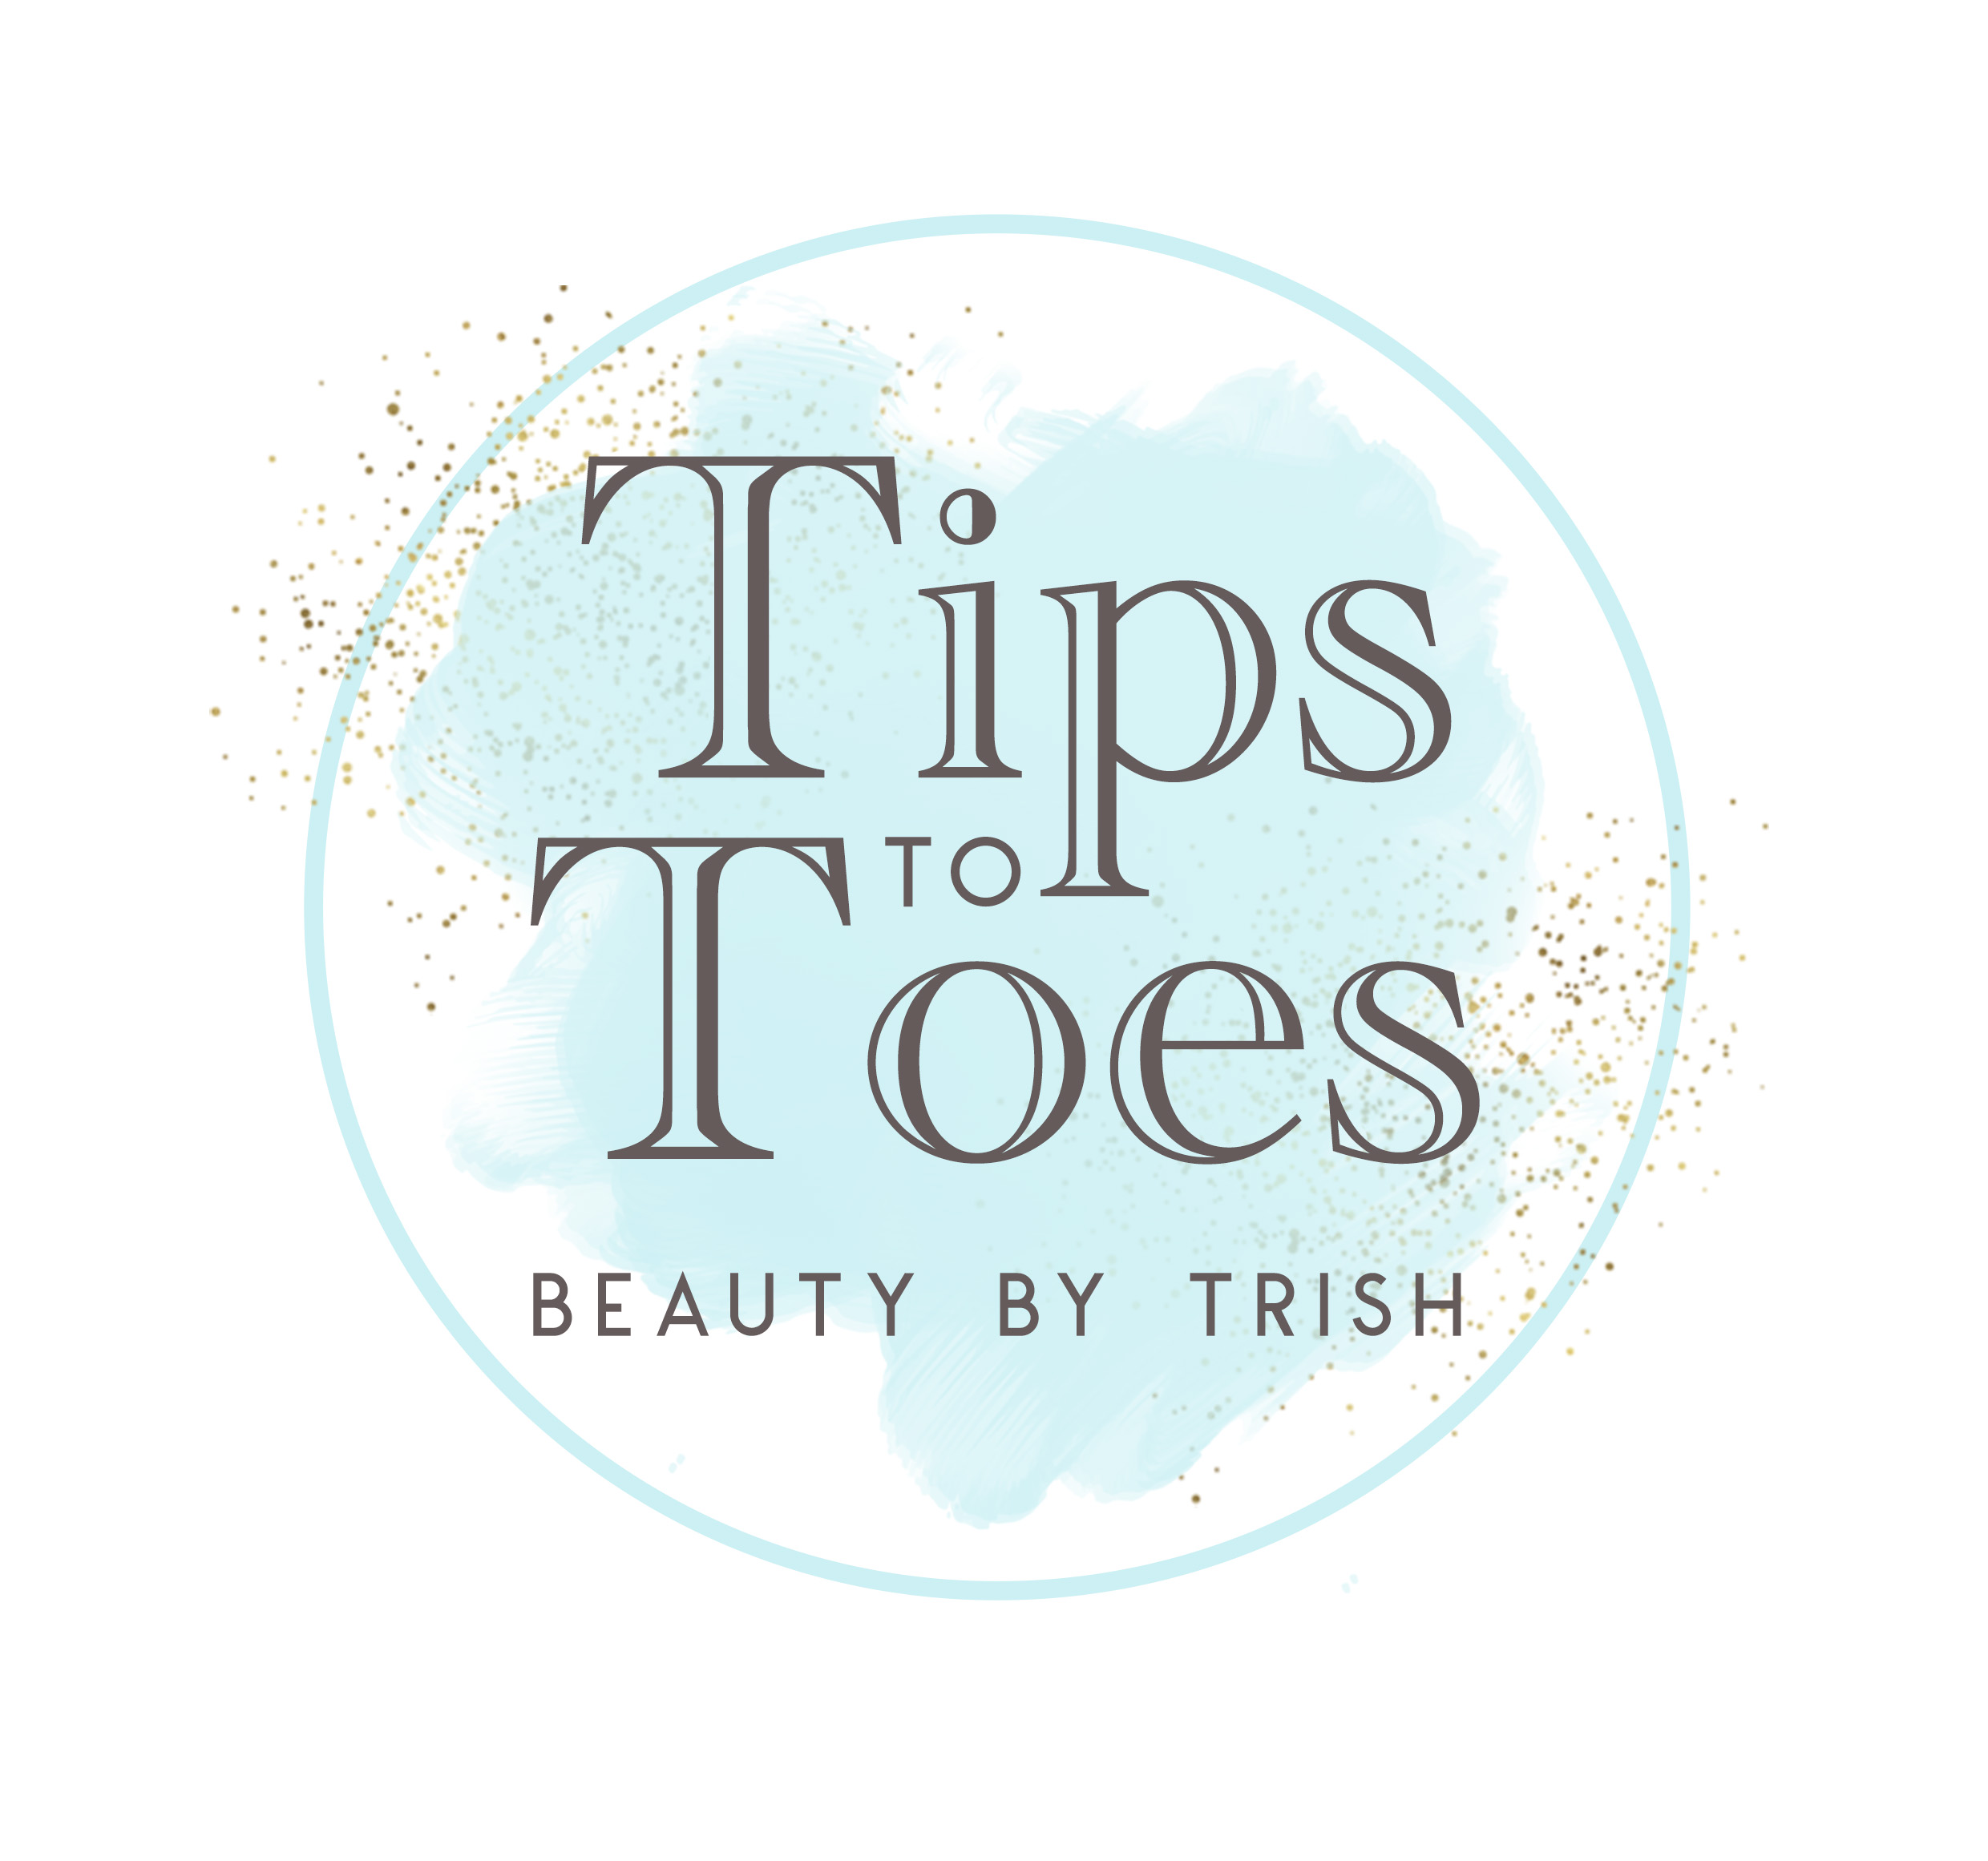 Tips to Toes Beauty by Trish Logo